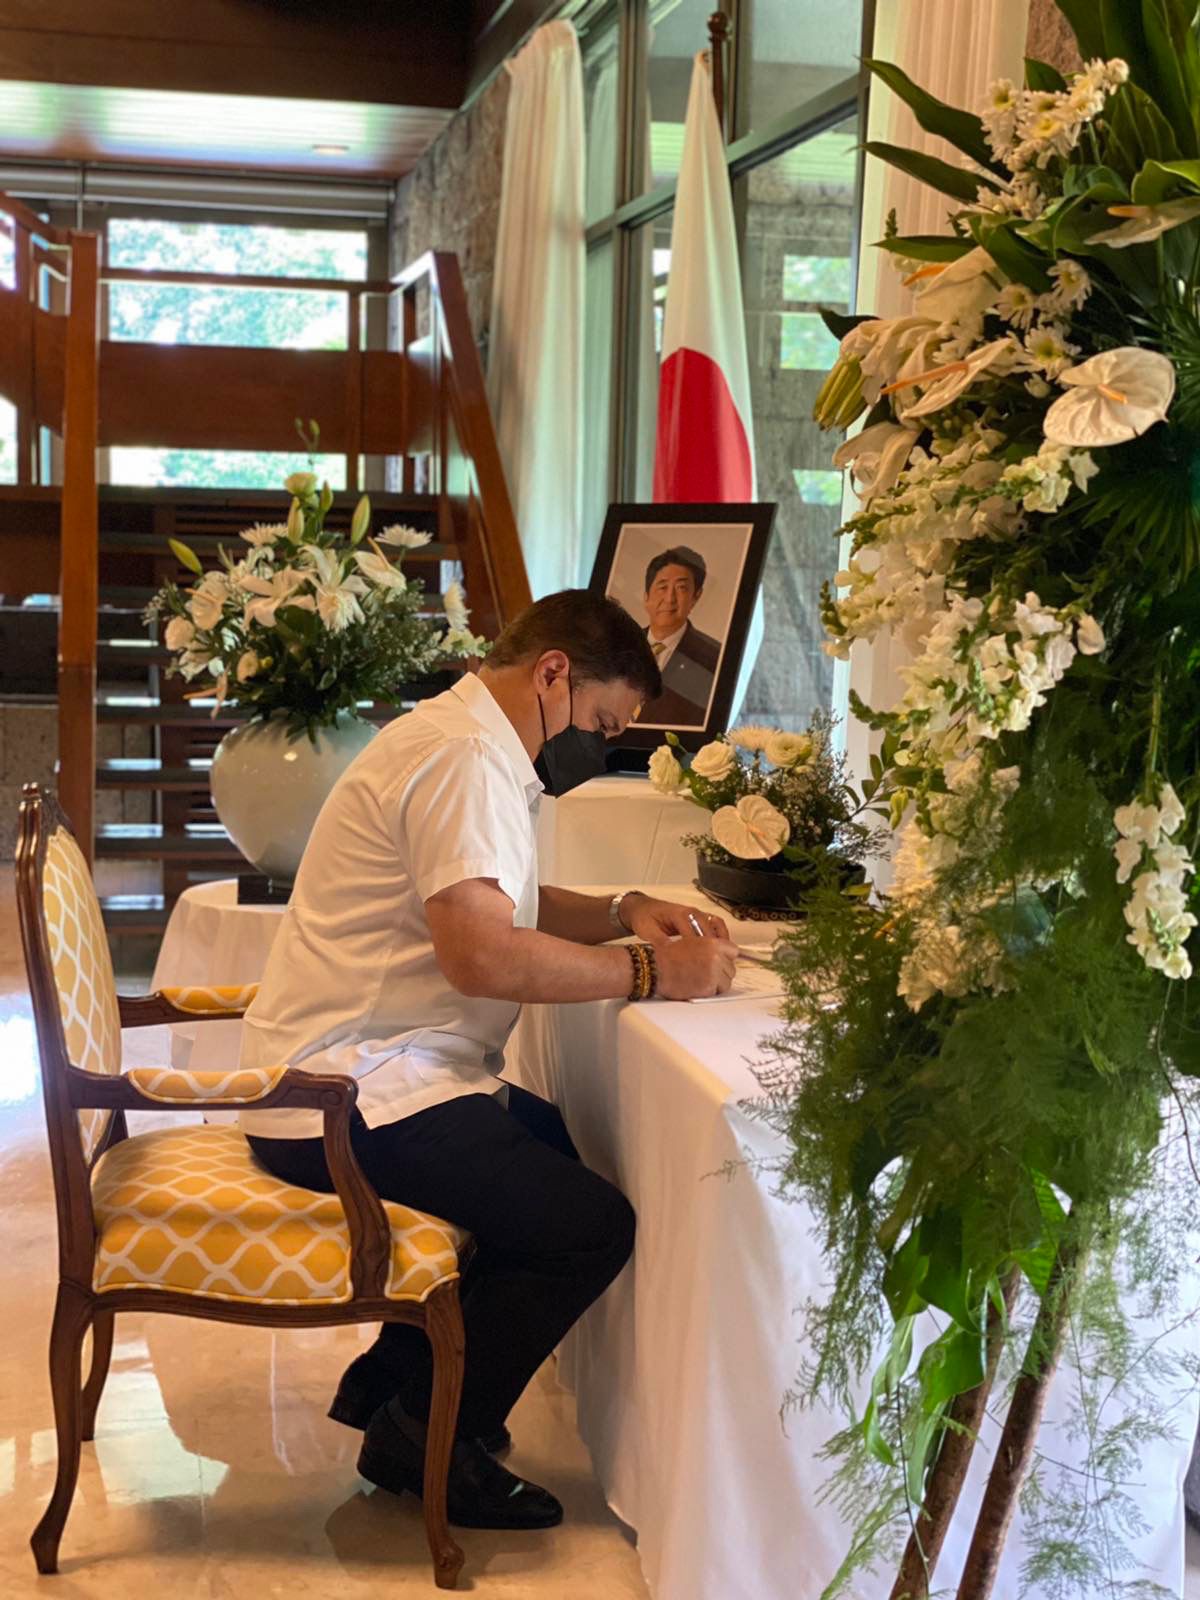 Senate President Pro Tempore Juan Miguel Zubiri signs the Book of Condolences for the death of former Prime Minister Shinzo Abe whose one of the greatest legacies to the Philippines is the Metro Manila Subway